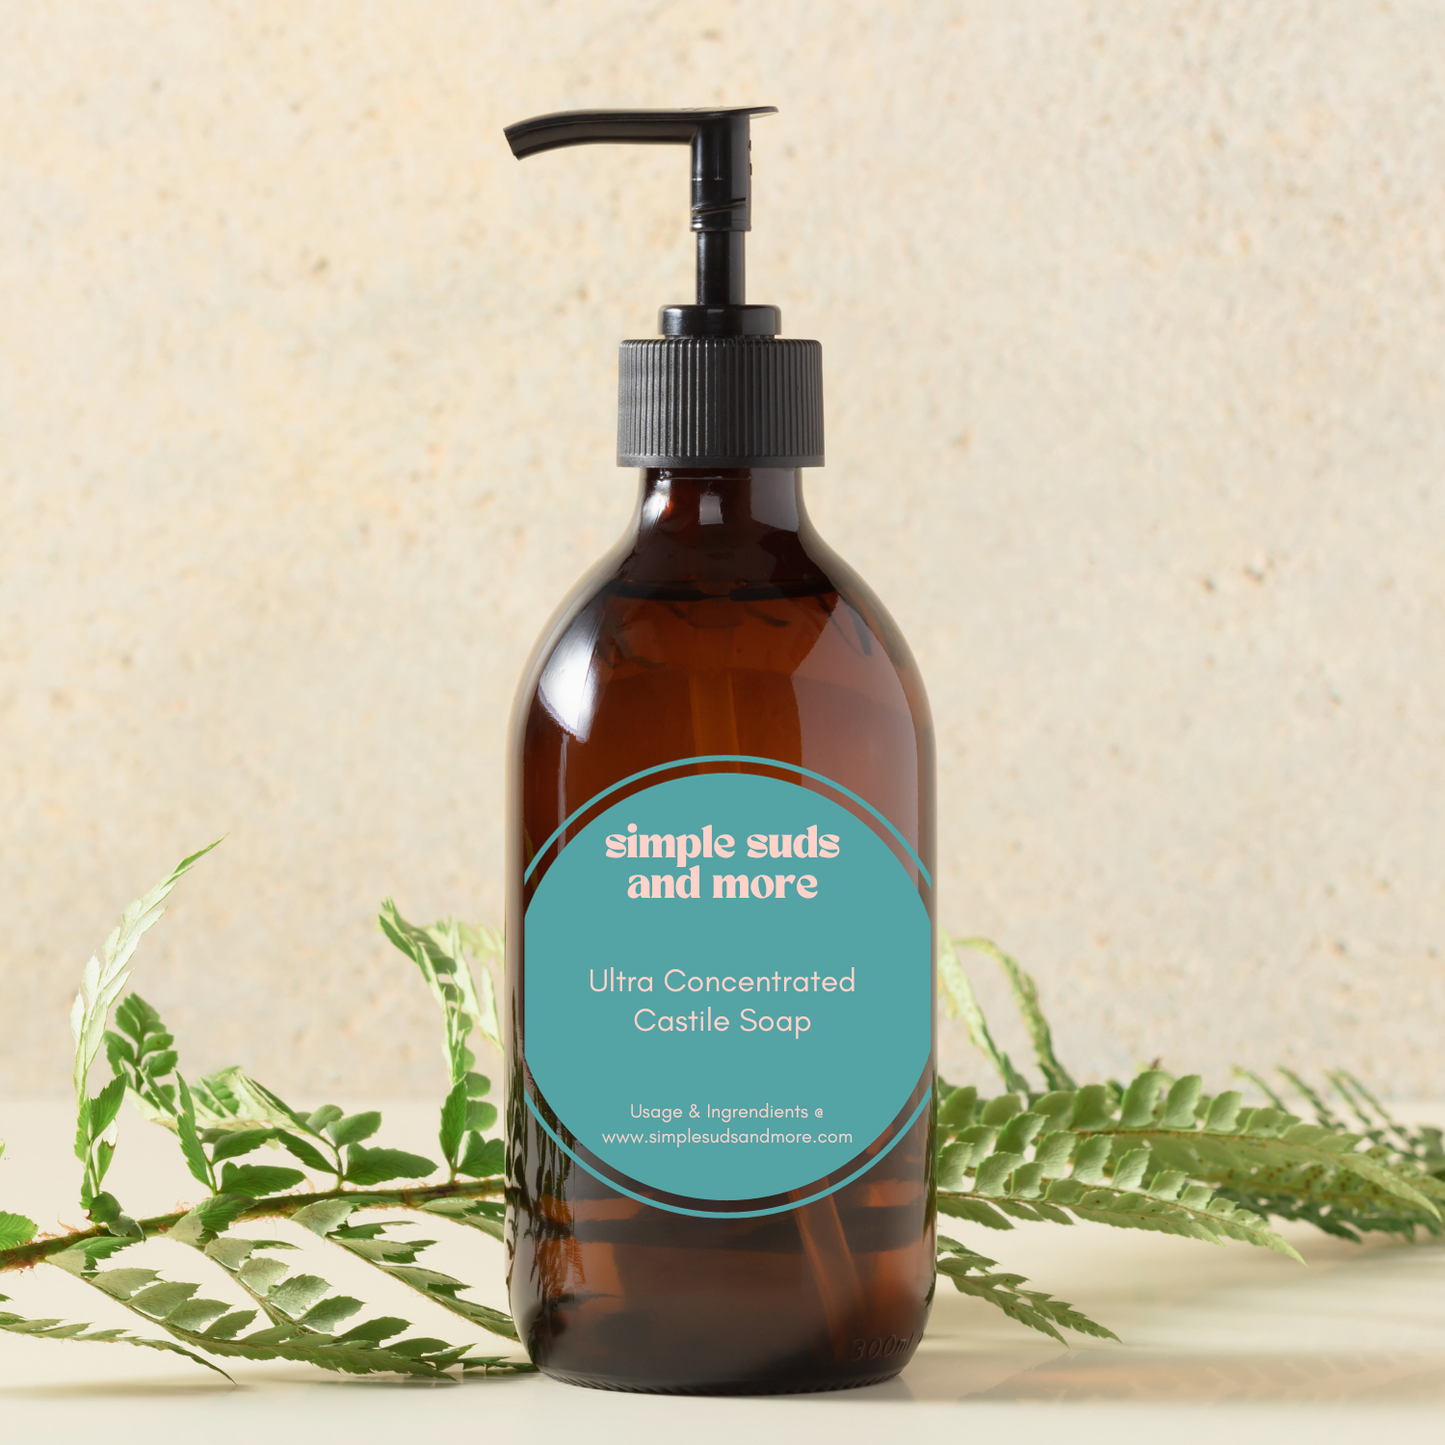 Ultra Concentrated Castile Soap